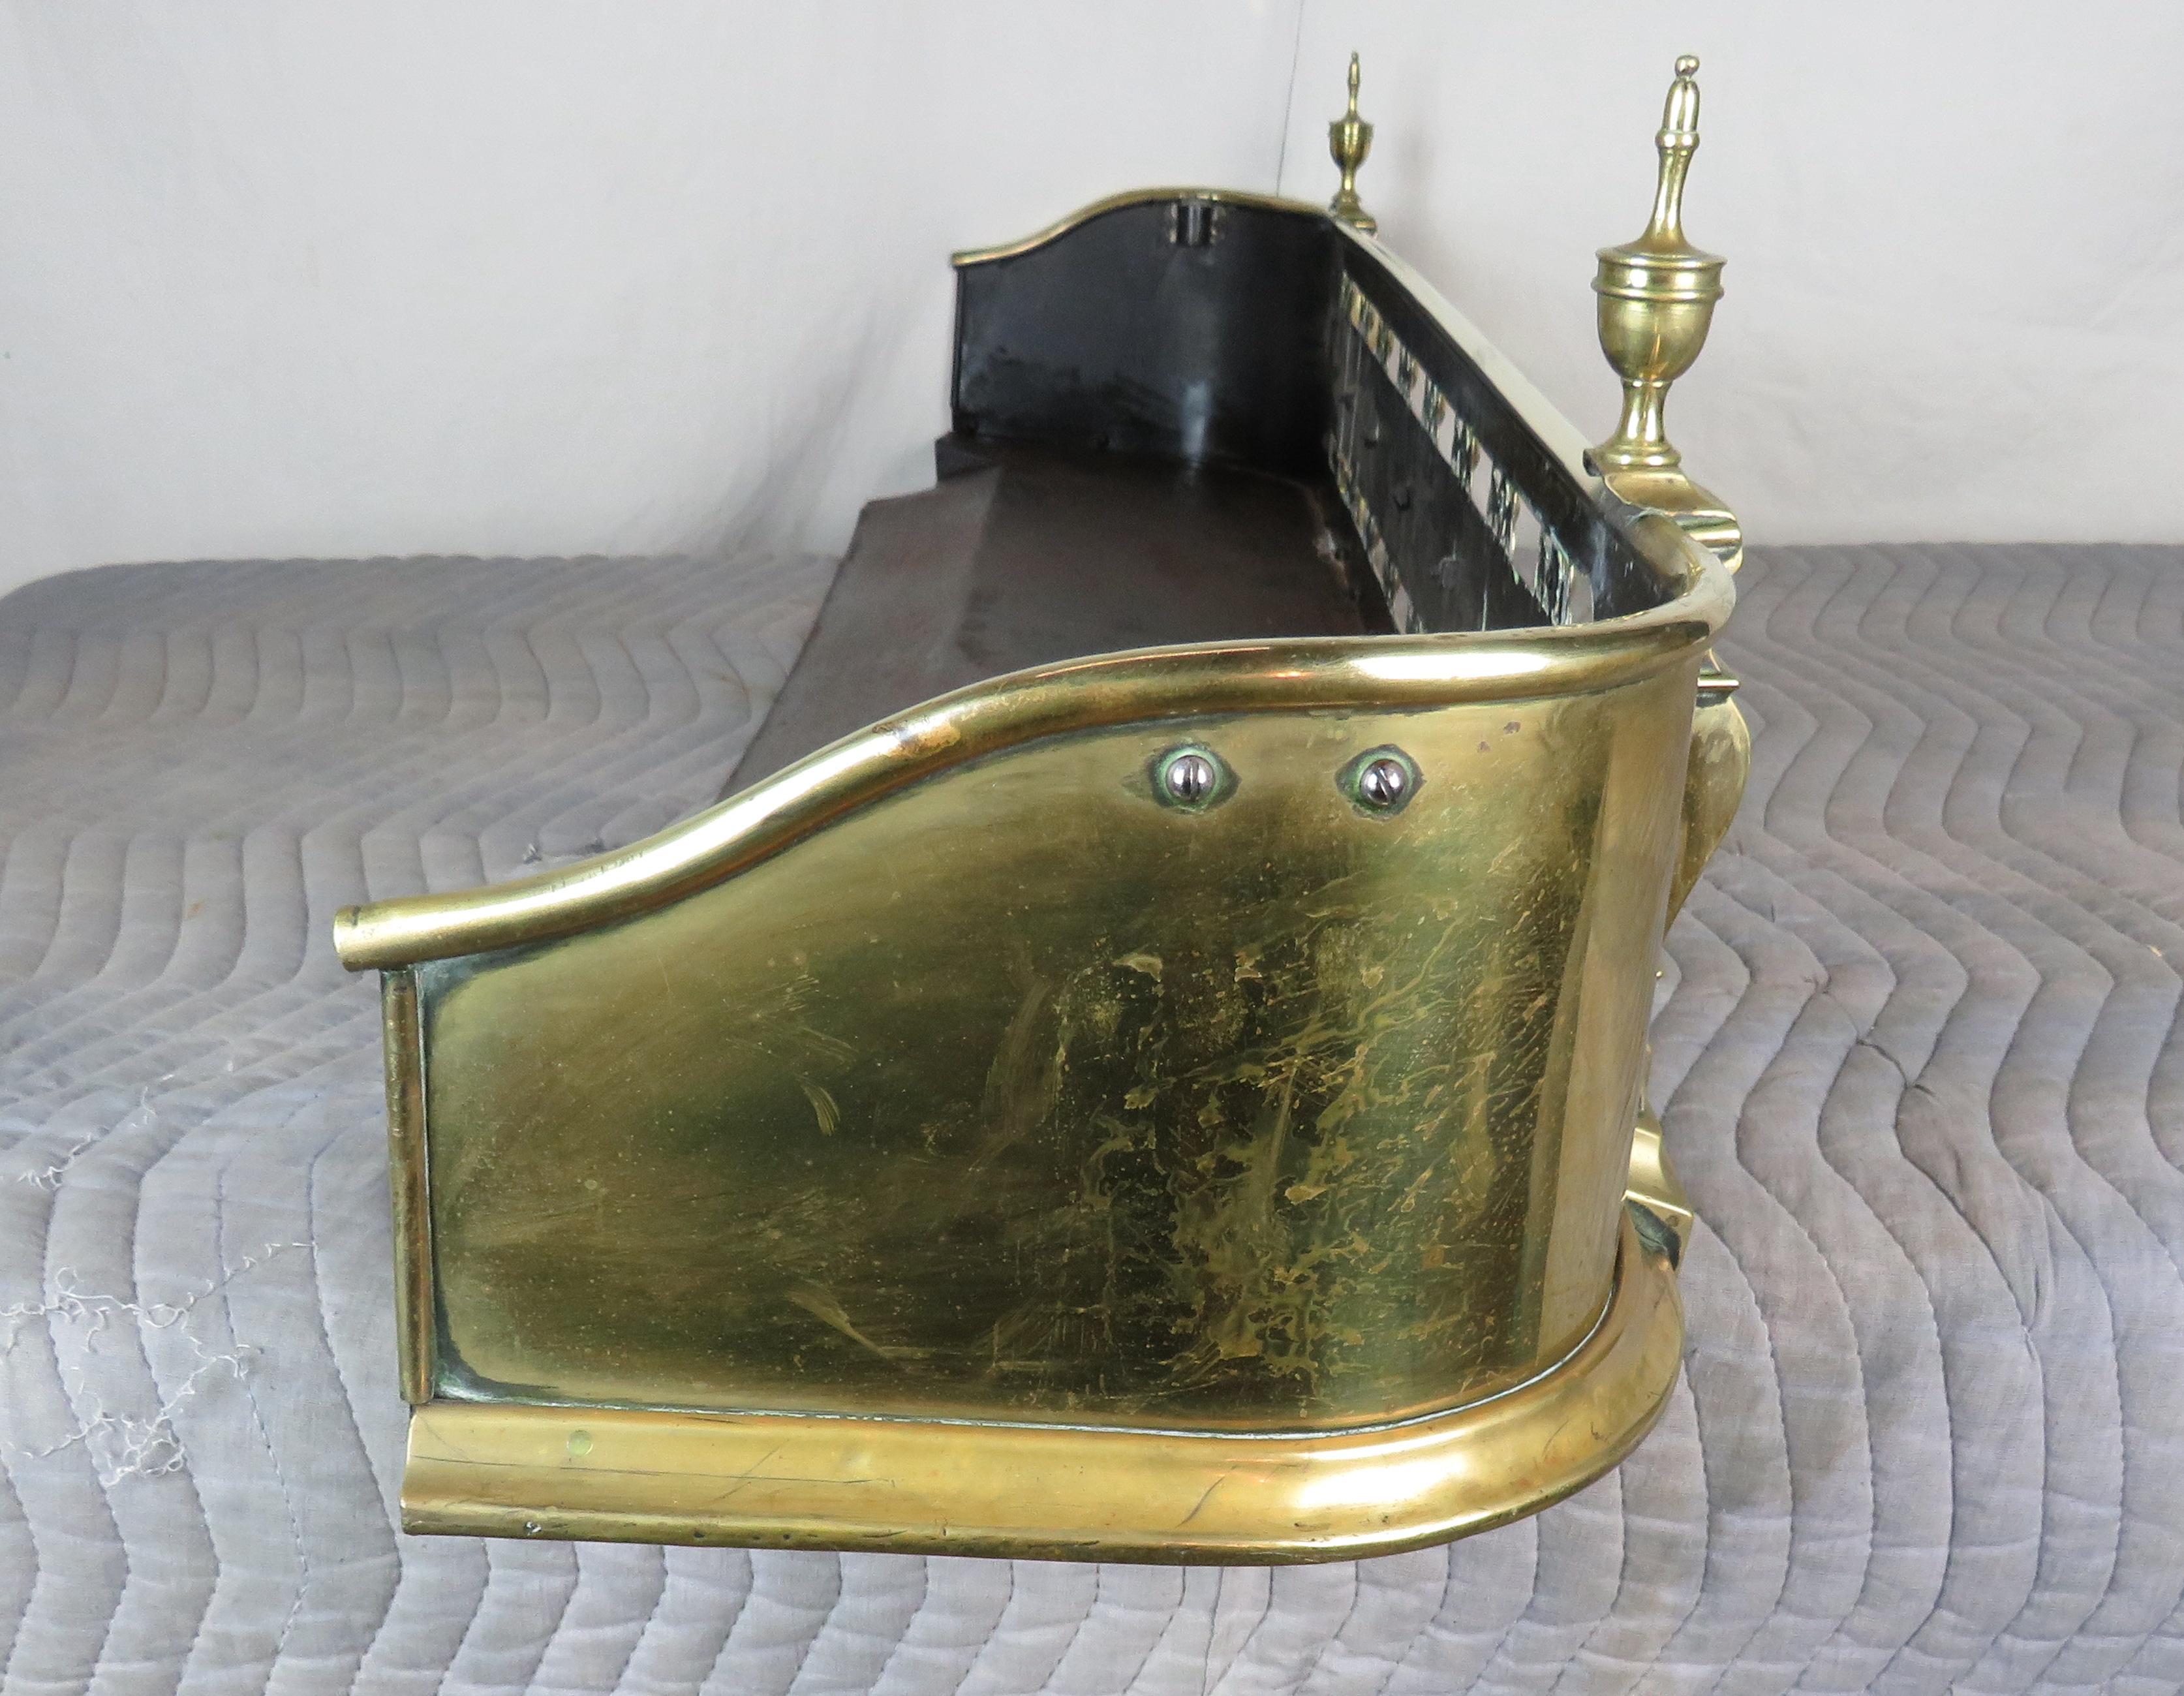 Brass fire fender with urn finials atop shaped molding on either side of pierced front.